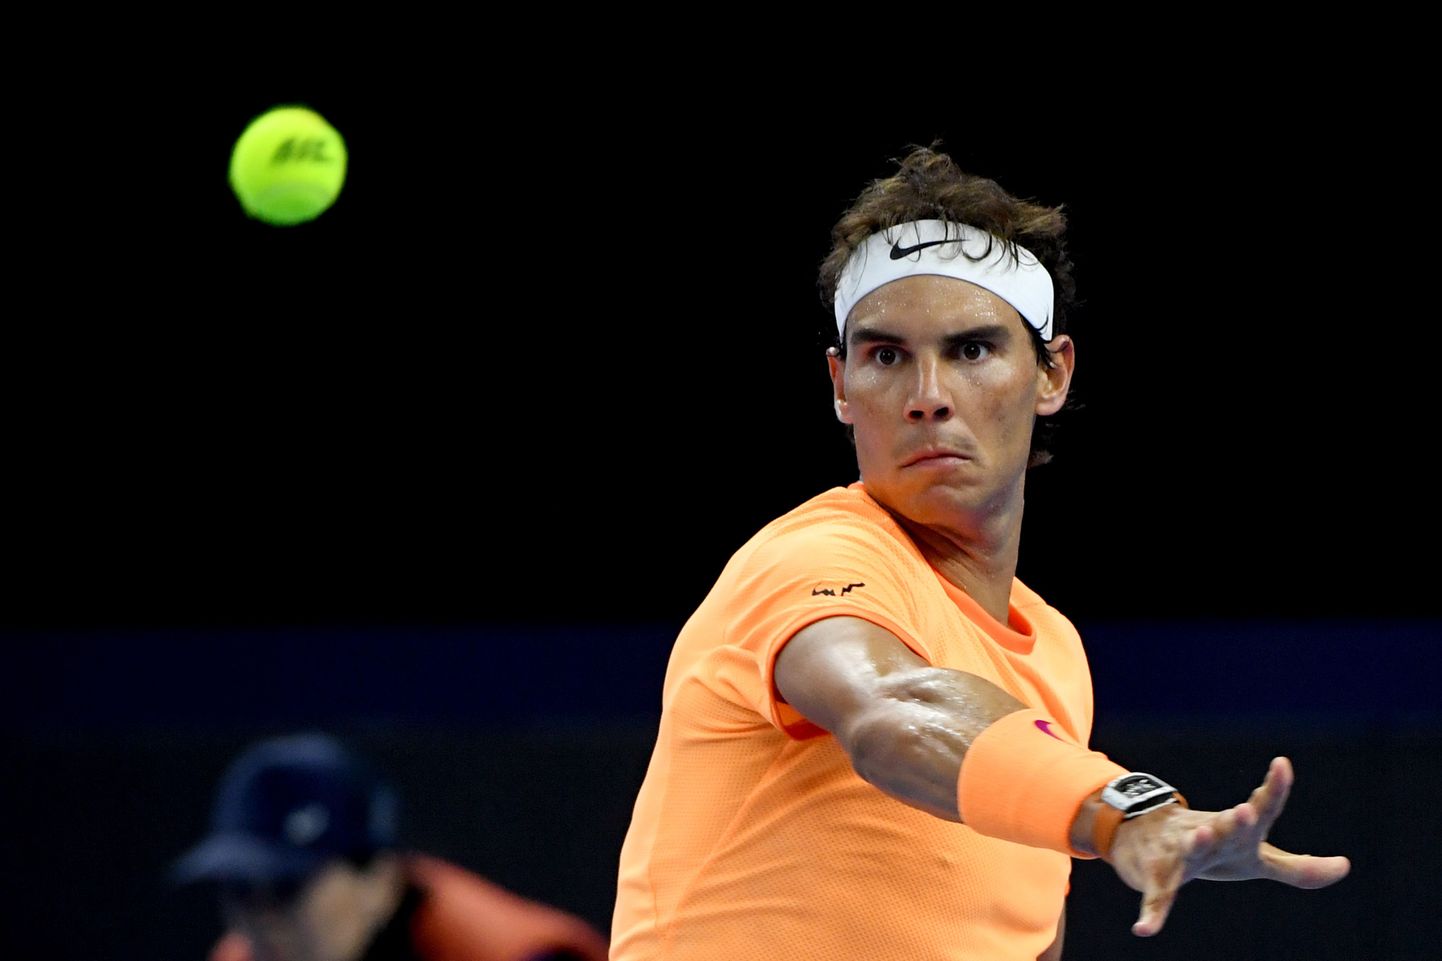 Rafael Nadal of Spain hits a return against Grigor Dimitrov of Bulgaria during the men's singles quater-finals match at the China Open tennis tournament in Beijing on October 7, 2016. / AFP PHOTO / WANG ZHAO